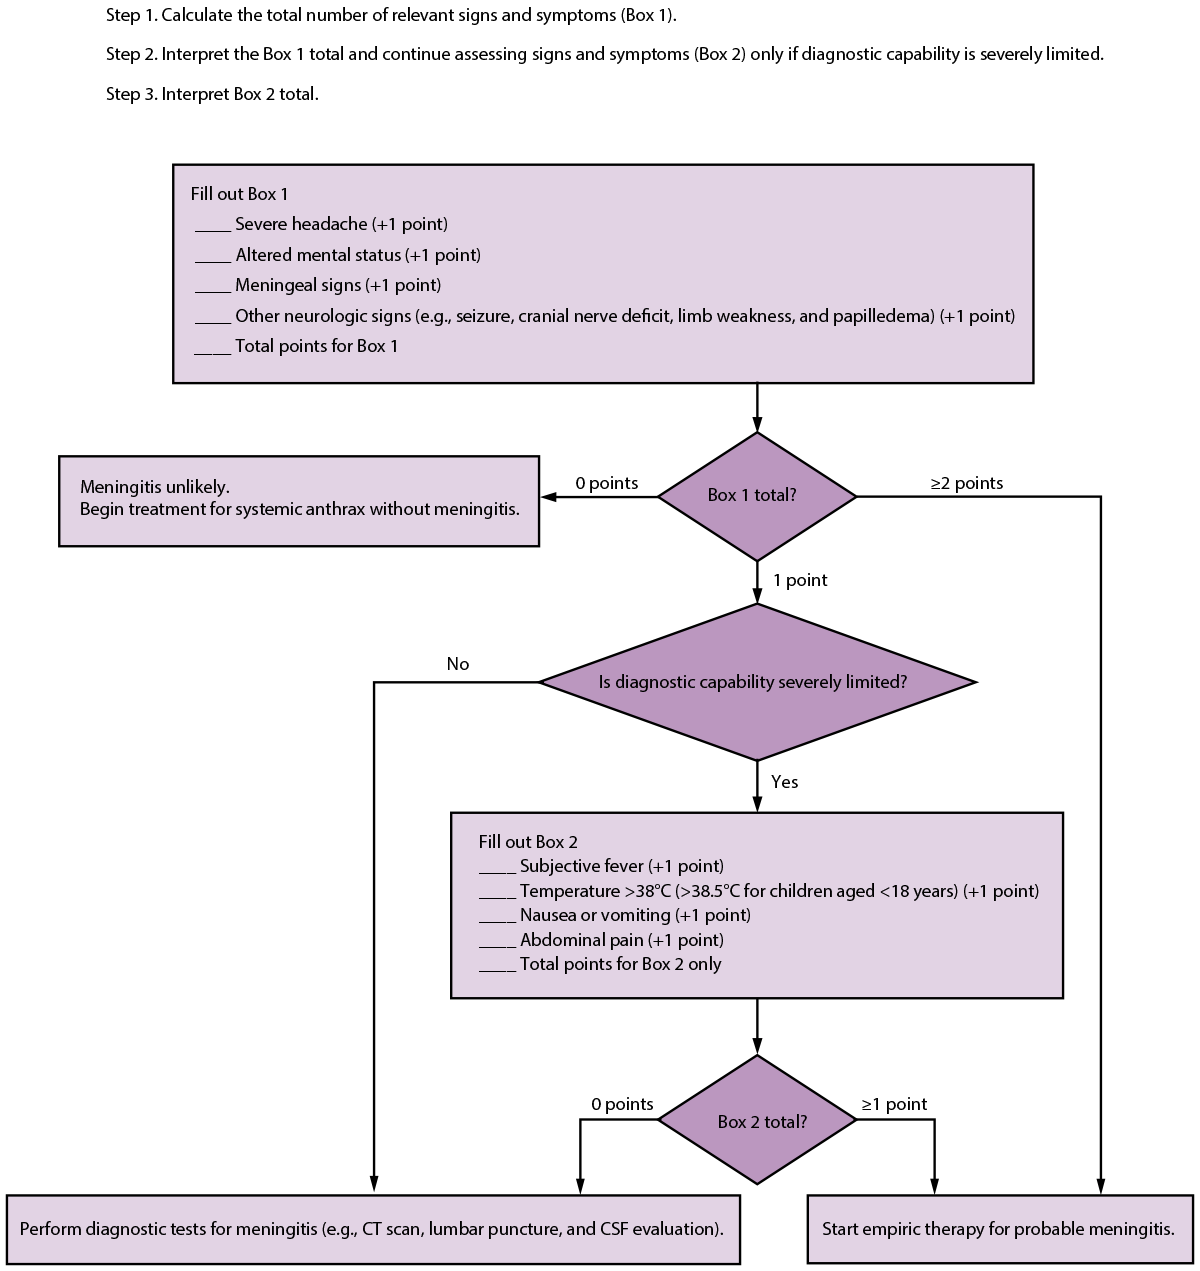 Figure illustrates the steps in a screening tool to identify potential anthrax meningitis cases by presenting signs and symptoms after a mass casualty event when diagnostic capability is limited.